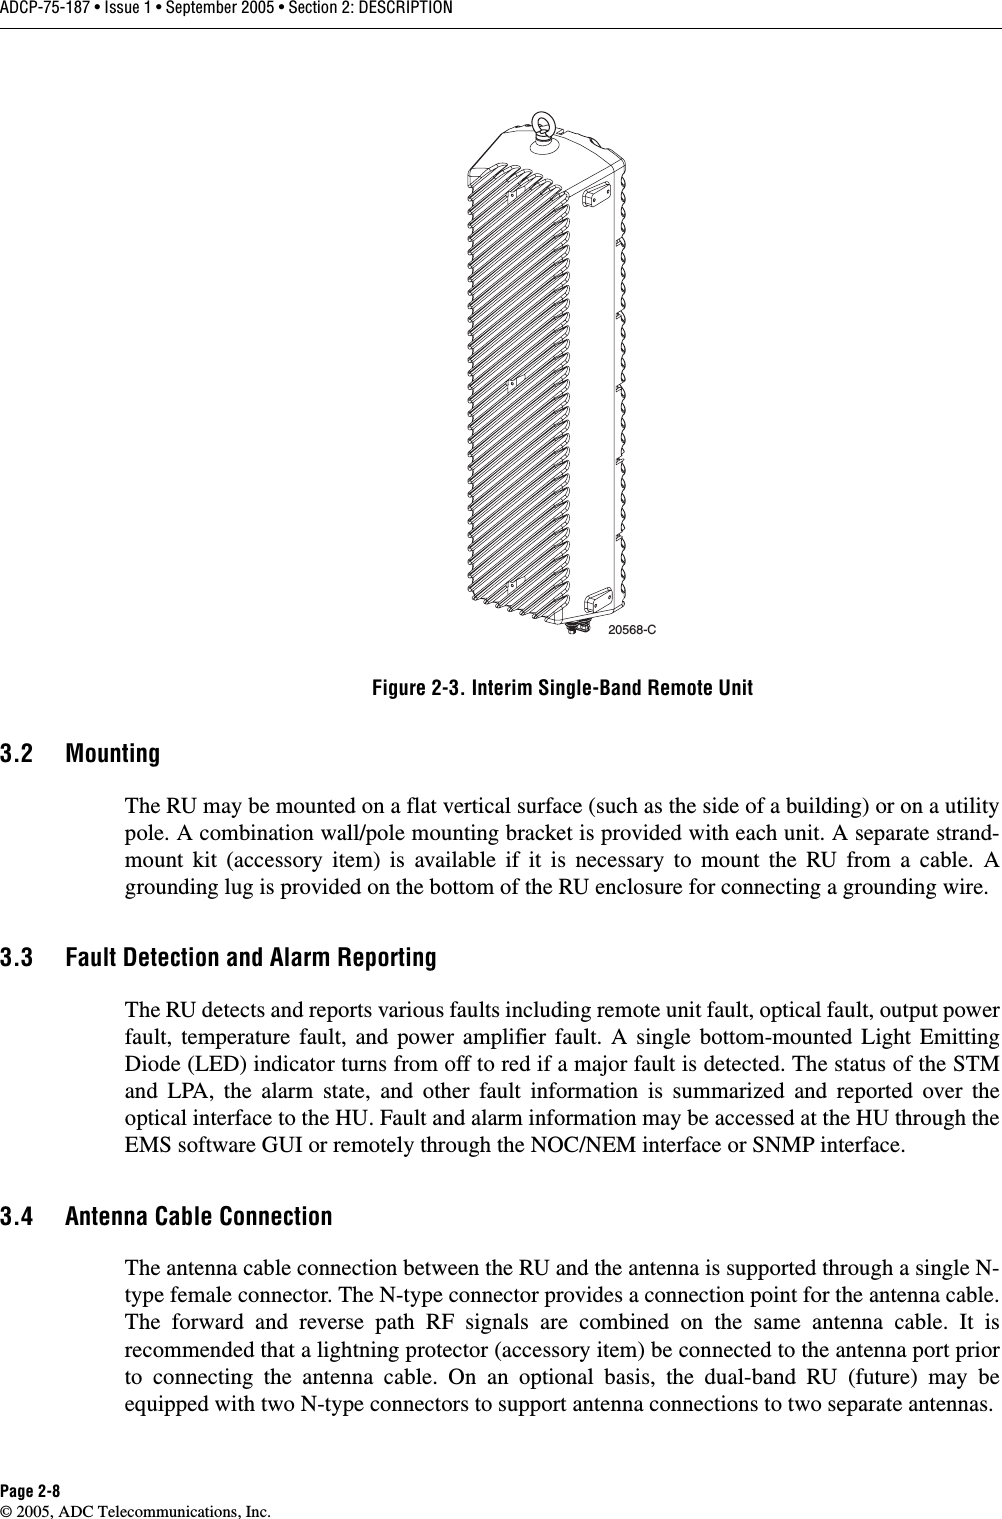 ADCP-75-187 • Issue 1 • September 2005 • Section 2: DESCRIPTIONPage 2-8© 2005, ADC Telecommunications, Inc.Figure 2-3. Interim Single-Band Remote Unit3.2 MountingThe RU may be mounted on a flat vertical surface (such as the side of a building) or on a utilitypole. A combination wall/pole mounting bracket is provided with each unit. A separate strand-mount kit (accessory item) is available if it is necessary to mount the RU from a cable. Agrounding lug is provided on the bottom of the RU enclosure for connecting a grounding wire. 3.3 Fault Detection and Alarm ReportingThe RU detects and reports various faults including remote unit fault, optical fault, output powerfault, temperature fault, and power amplifier fault. A single bottom-mounted Light EmittingDiode (LED) indicator turns from off to red if a major fault is detected. The status of the STMand LPA, the alarm state, and other fault information is summarized and reported over theoptical interface to the HU. Fault and alarm information may be accessed at the HU through theEMS software GUI or remotely through the NOC/NEM interface or SNMP interface. 3.4 Antenna Cable ConnectionThe antenna cable connection between the RU and the antenna is supported through a single N-type female connector. The N-type connector provides a connection point for the antenna cable.The forward and reverse path RF signals are combined on the same antenna cable. It isrecommended that a lightning protector (accessory item) be connected to the antenna port priorto connecting the antenna cable. On an optional basis, the dual-band RU (future) may beequipped with two N-type connectors to support antenna connections to two separate antennas. 20568-C